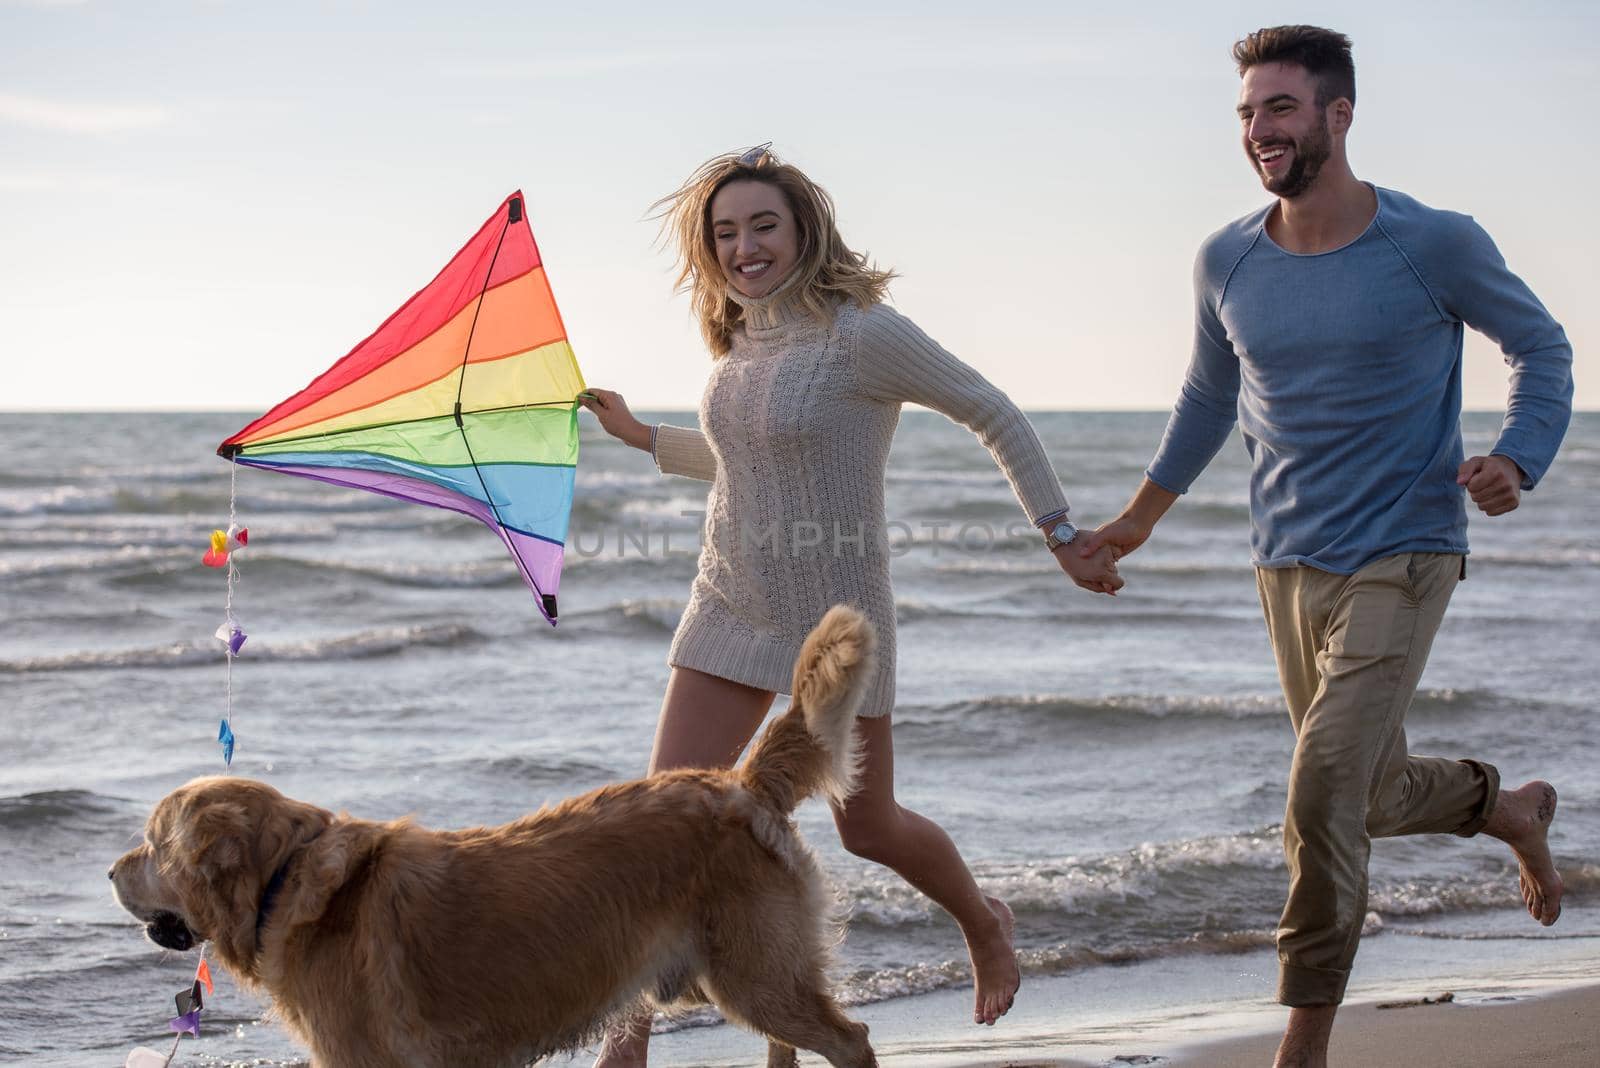 Young Couple having fun playing with a dog and Kite on the beach at autumn day